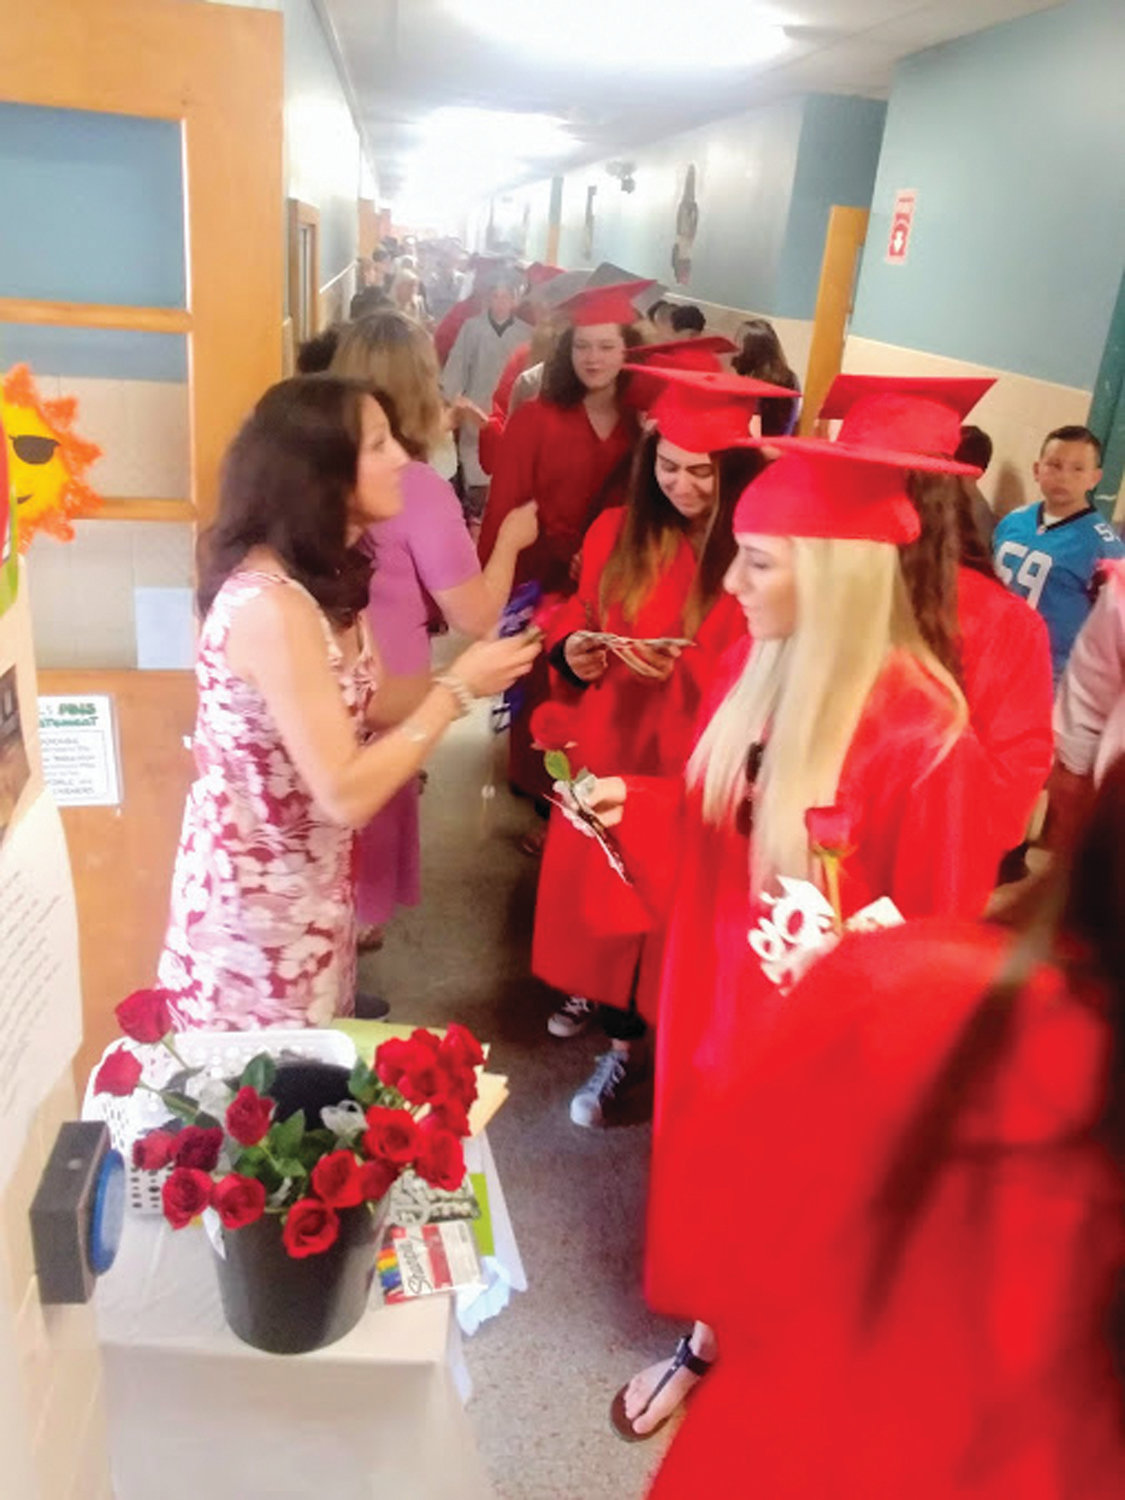 SPECIAL TOKEN: Lisa Davis had a rose for each senior who was a former student of hers. This year’s graduating class was her first class at Glen Hills Elementary School.